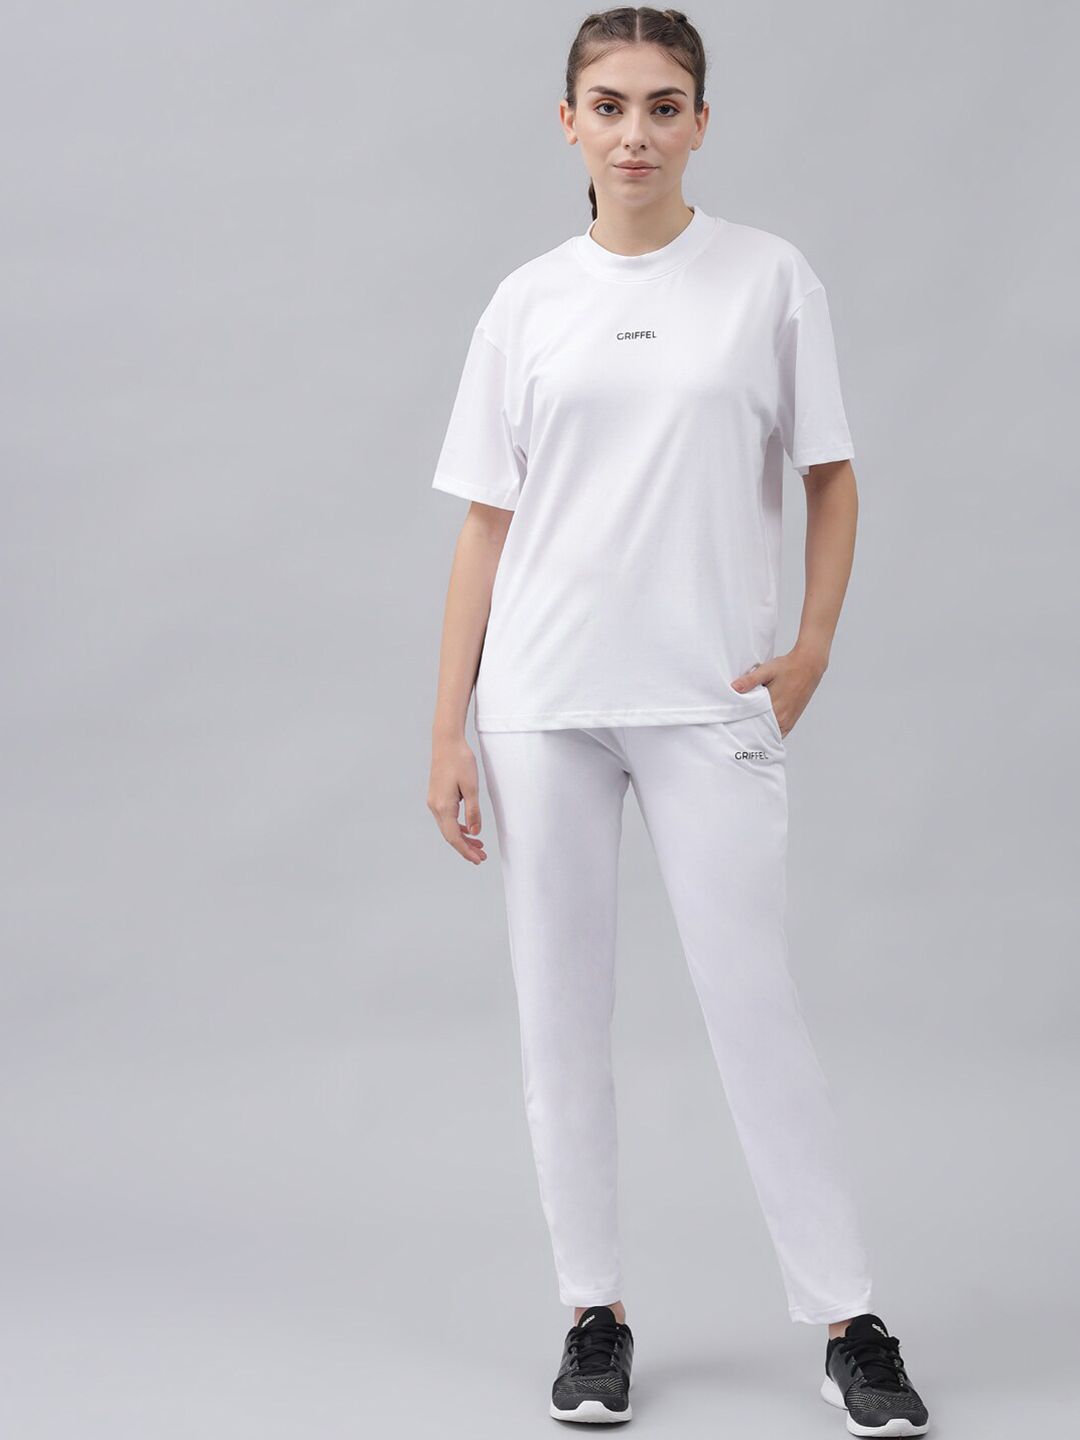 GRIFFEL Women White Melange Cotton Track Suit Price in India